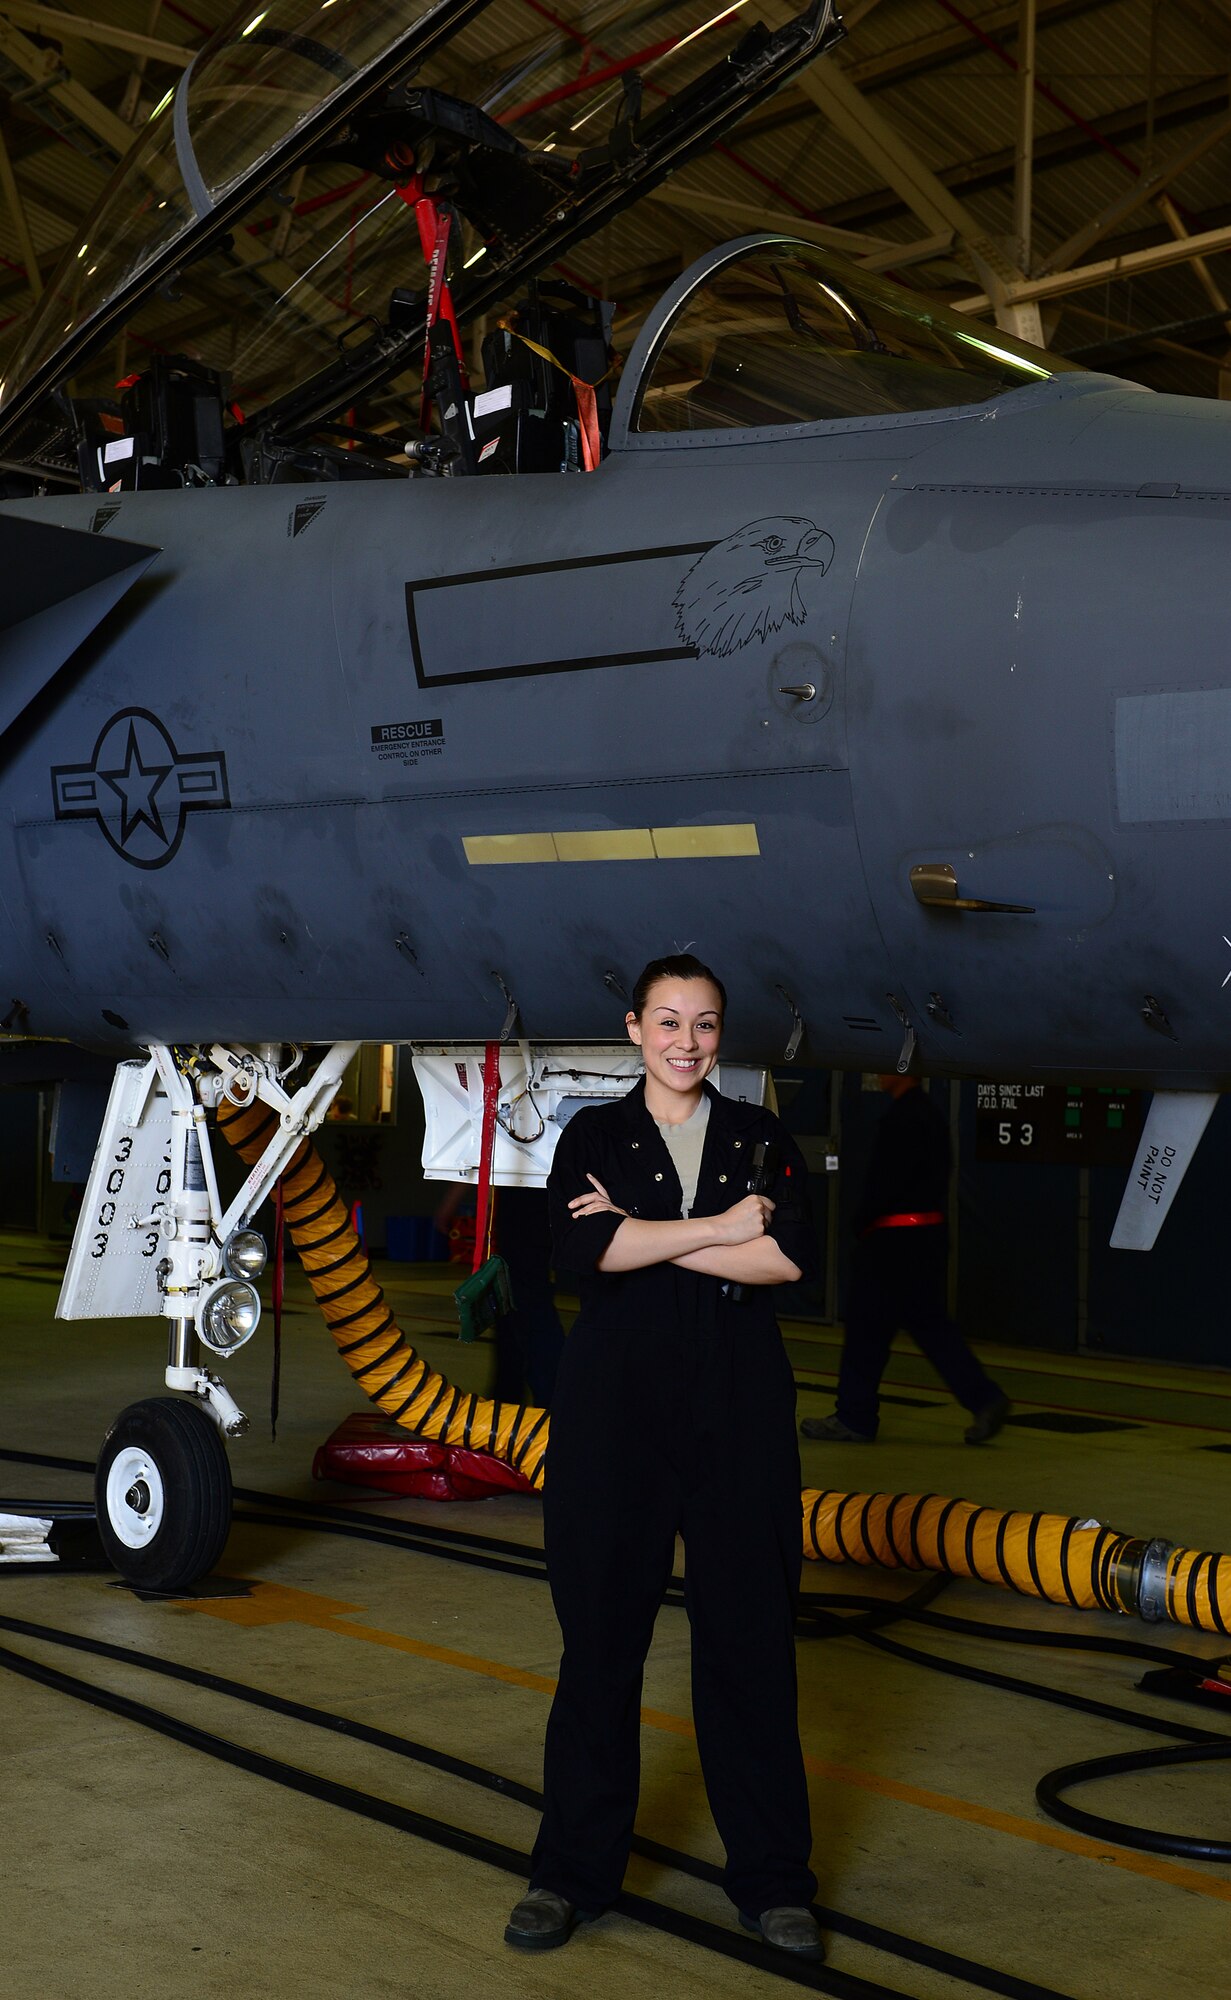 ROYAL AIR FORCE LAKENHEATH, England - Senior Airman Annette Bieniek, 48th Equipment Maintenance Squadron inspection section journeyman, stands in front of one of the F-15E Strike Eagles she is responsible for inspecting.  Bieniek's story of overcoming adversity is one of several being featured during Womens' History Month.  (U.S. Air Force photo by Staff Sgt. Stephanie Mancha)